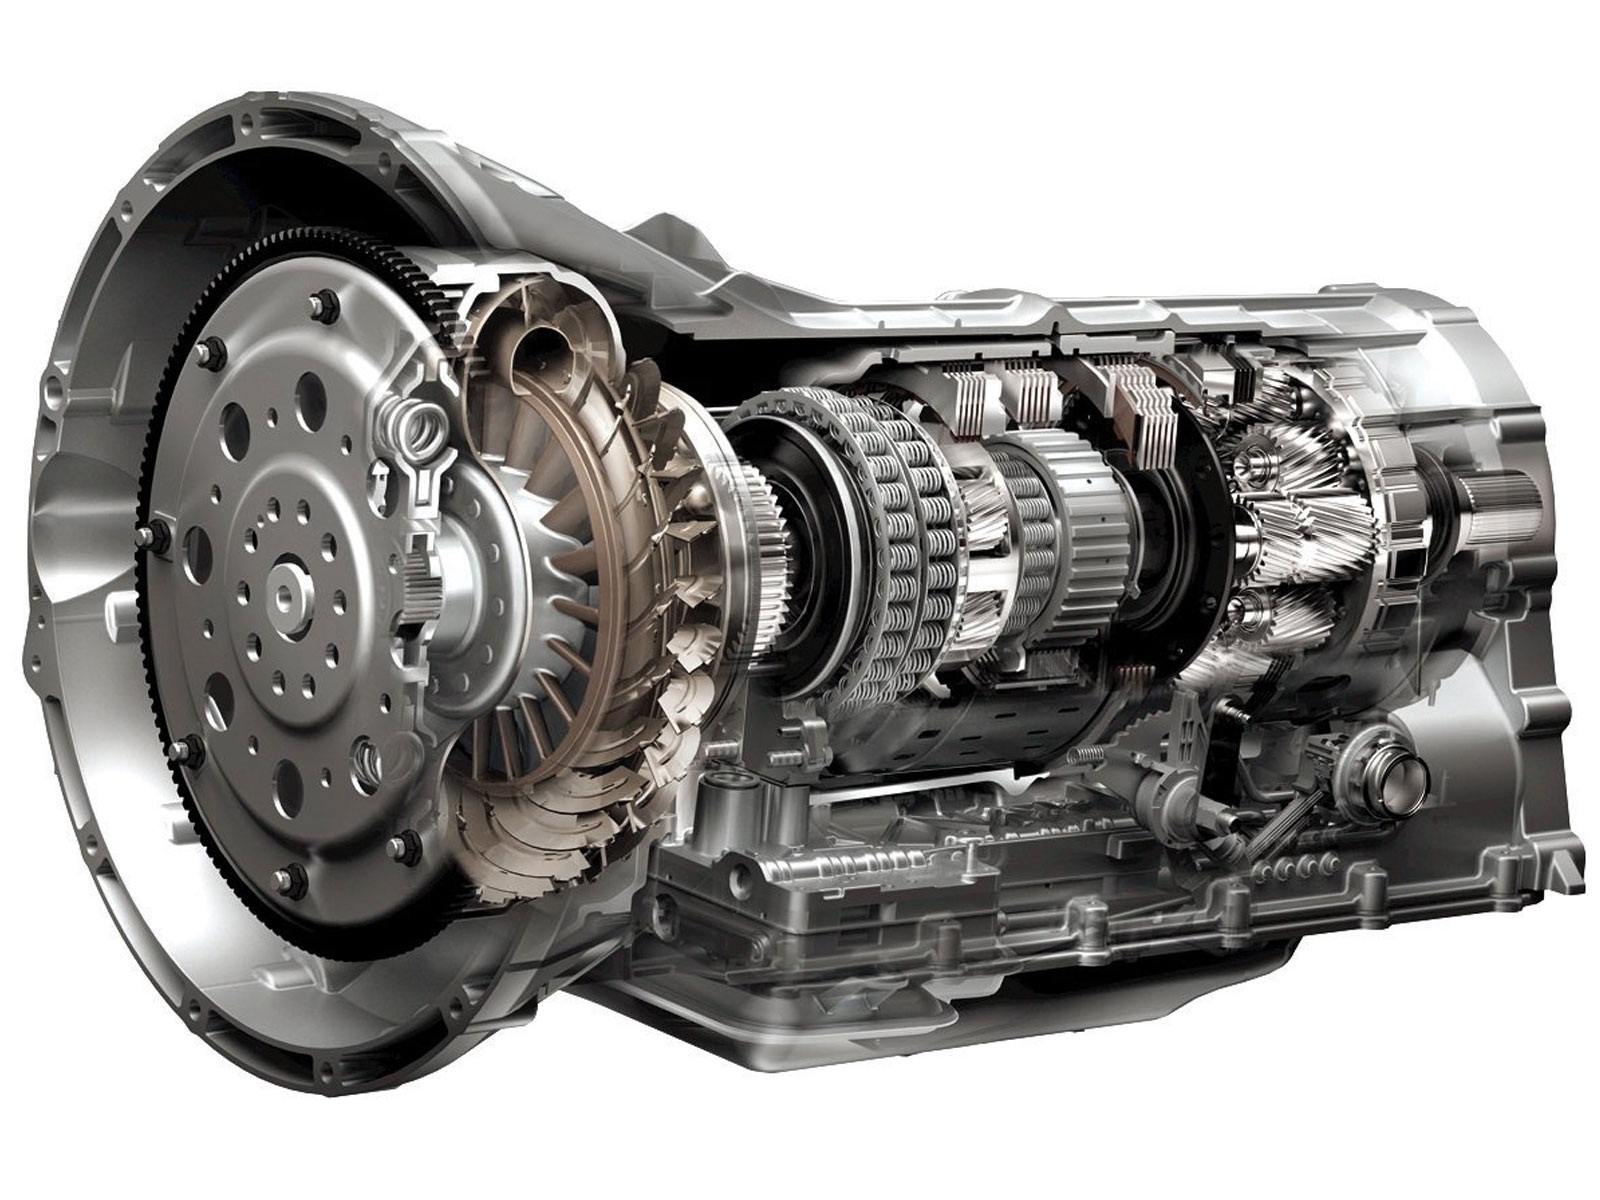 Things to consider when deciding on the transmission system